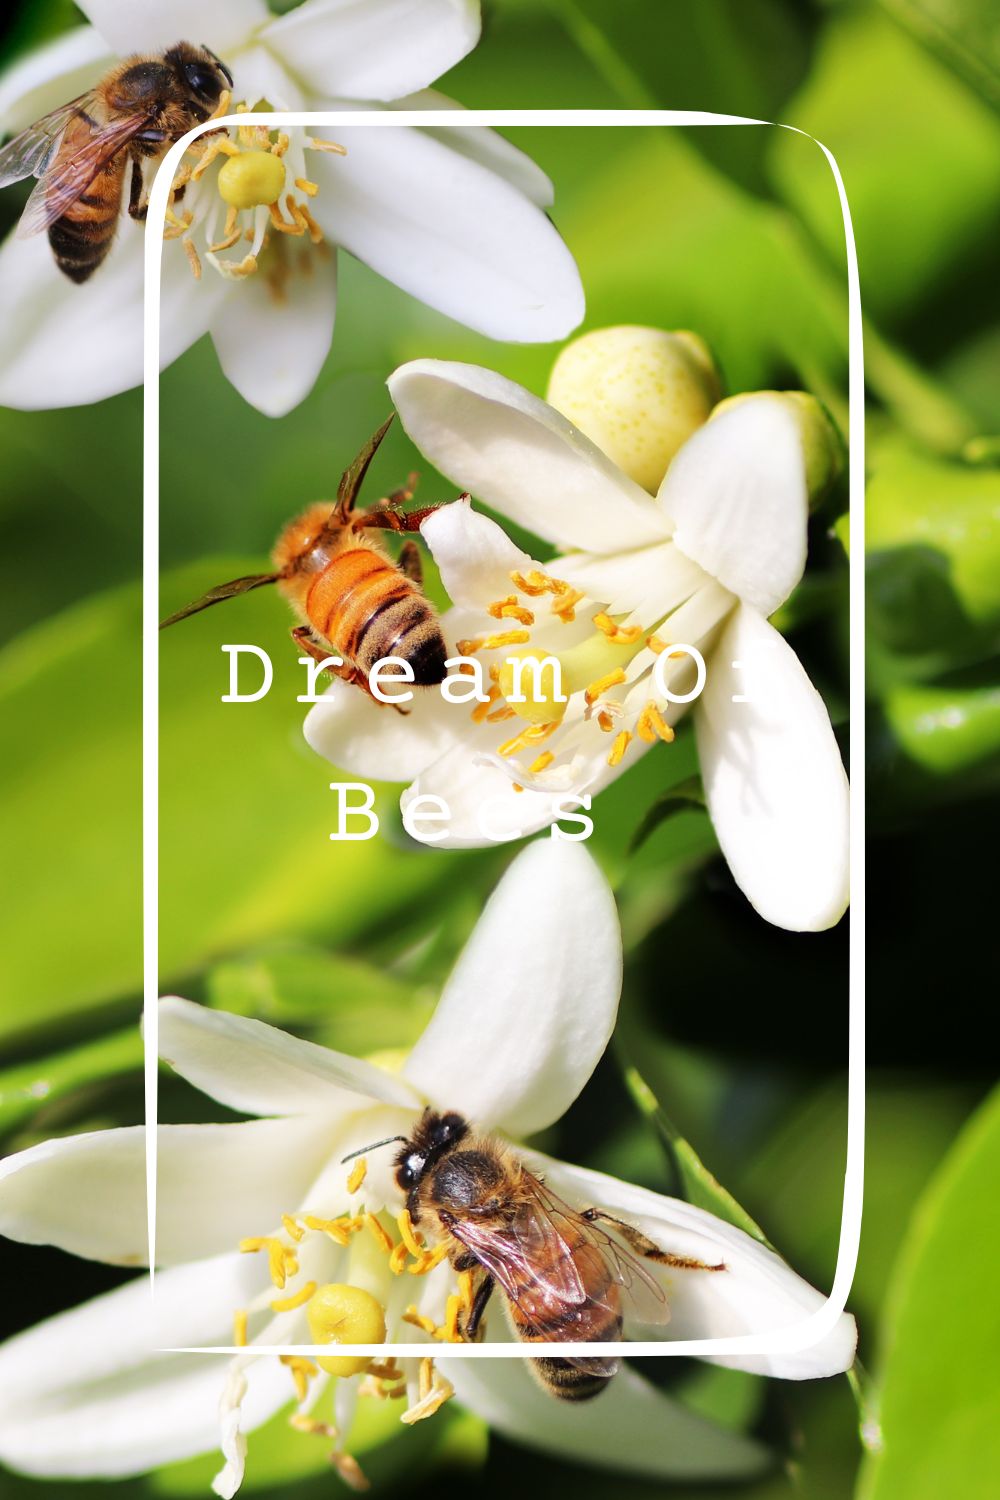 Dream Of Bees Meanings 1